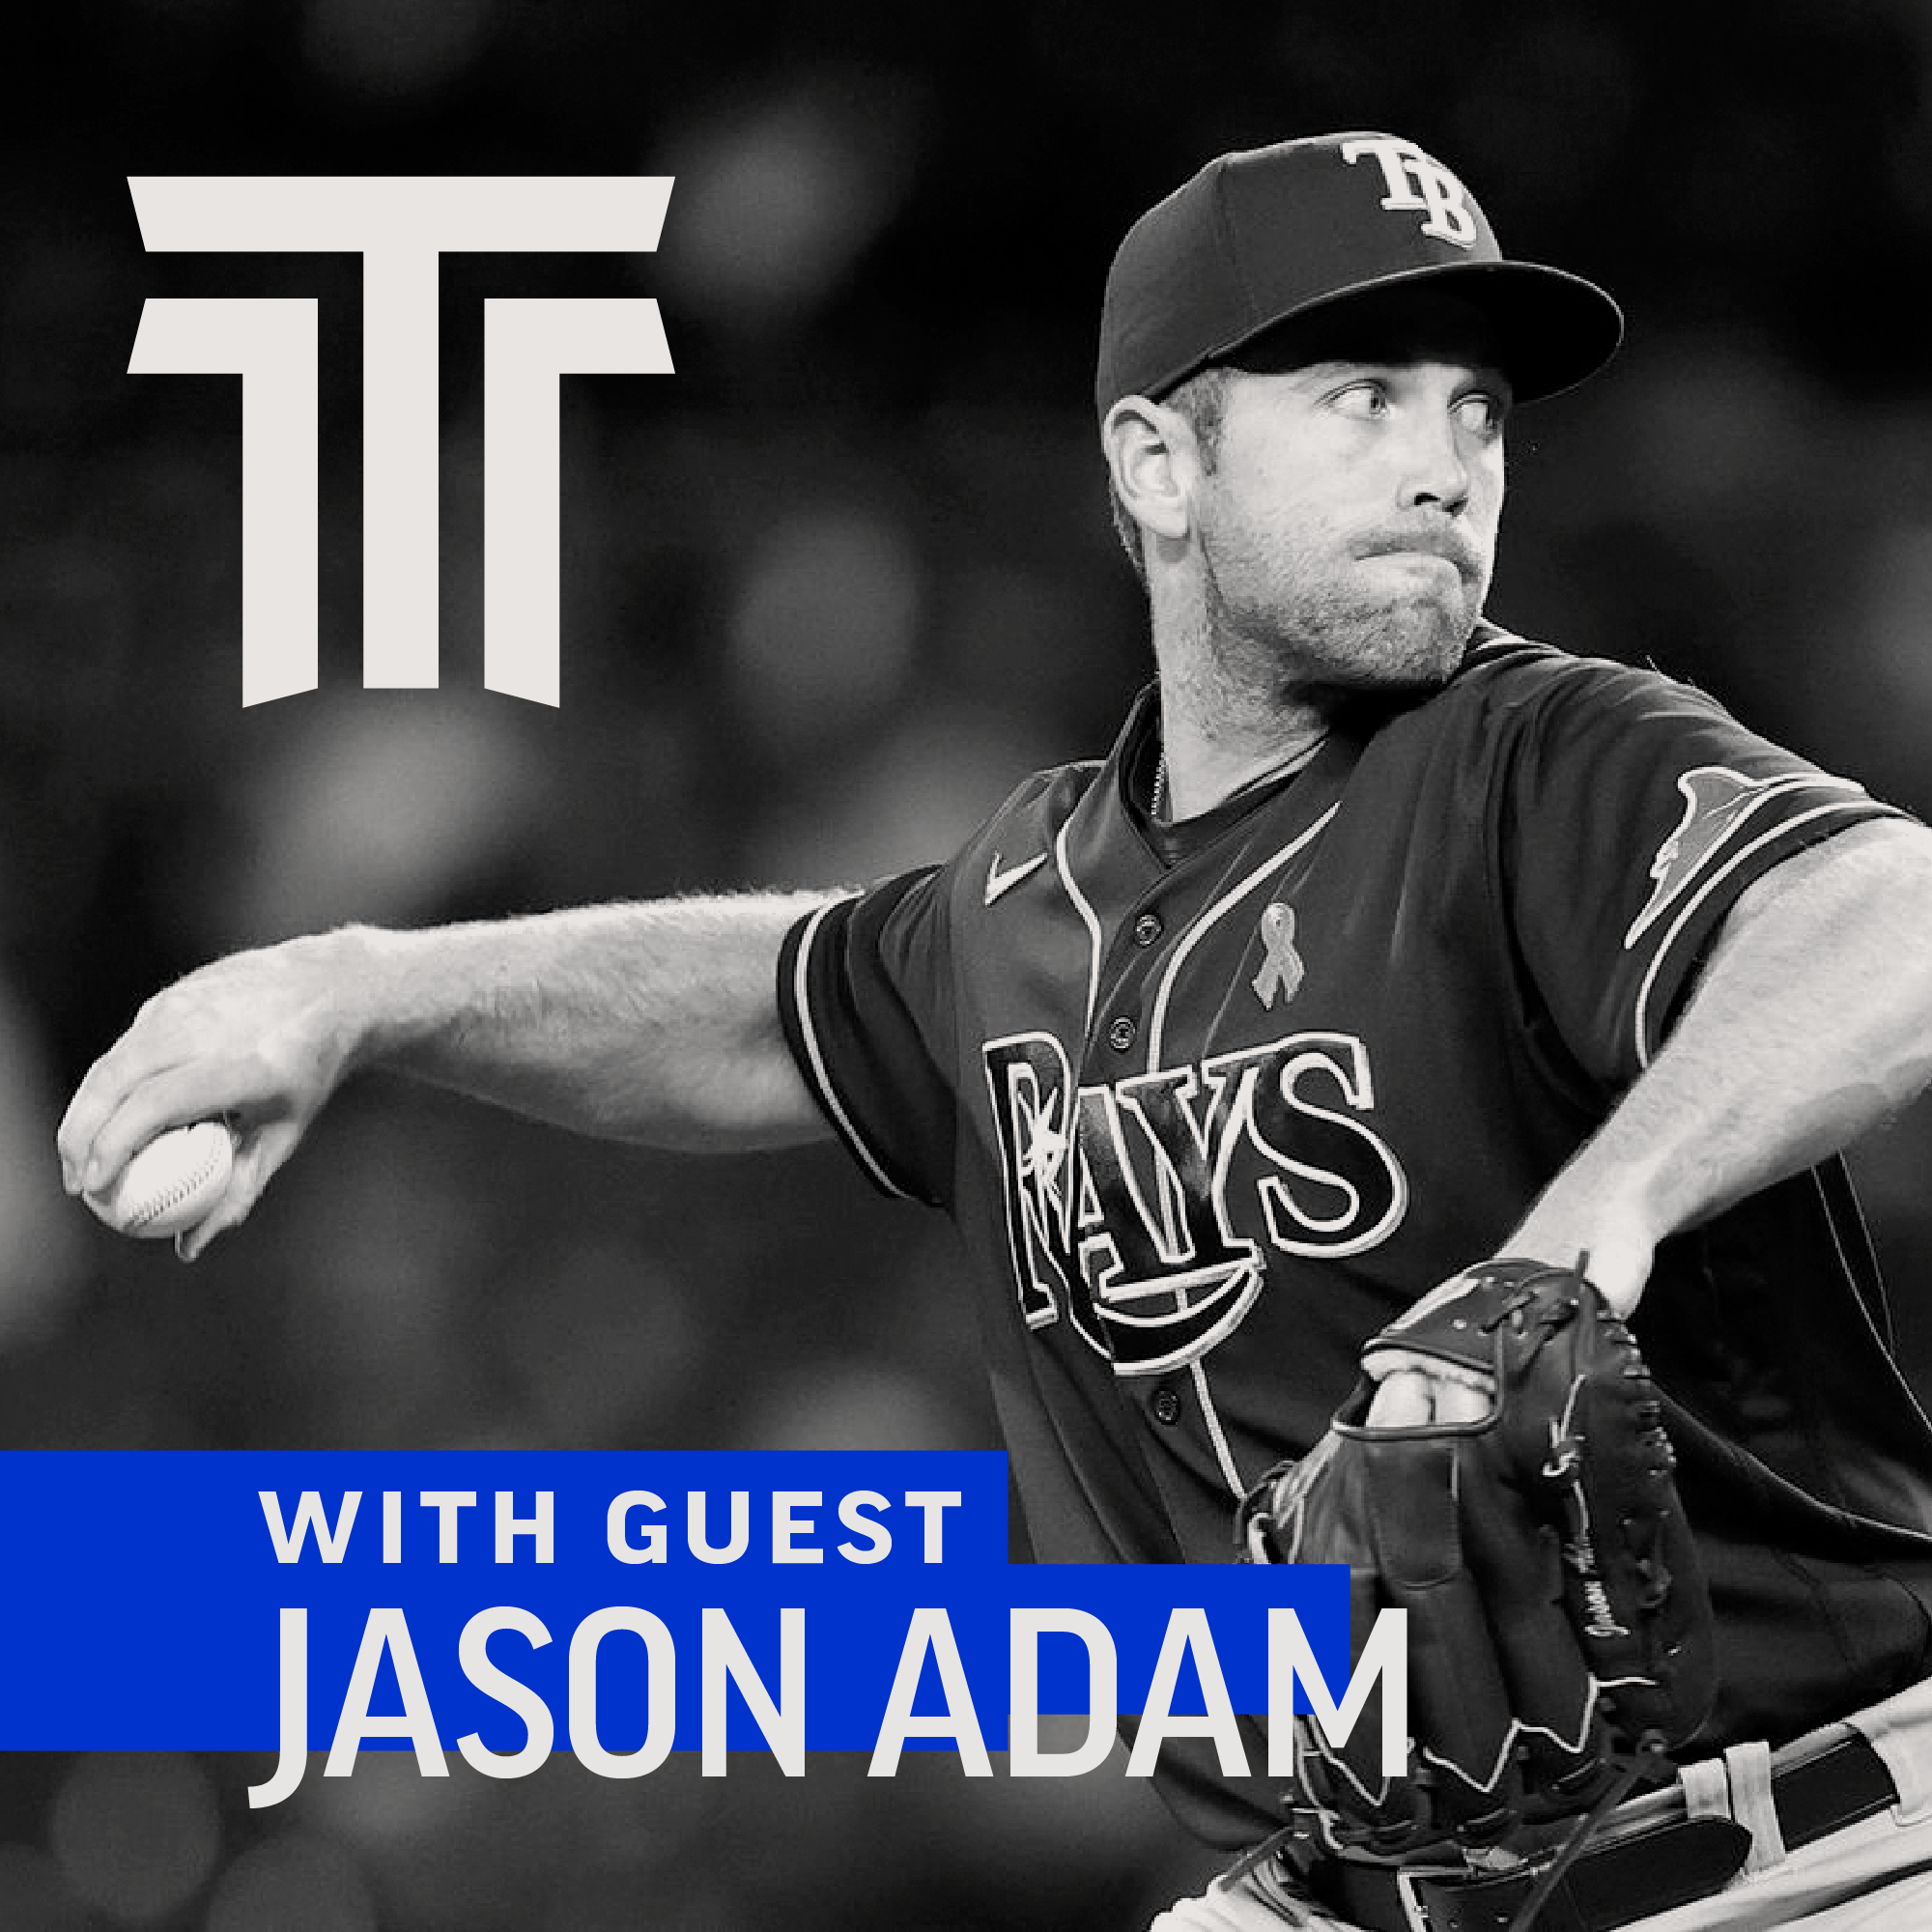 Would You Wear an LGBTQ+ Pride Patch? An Interview with MLB Pitcher Jason Adam